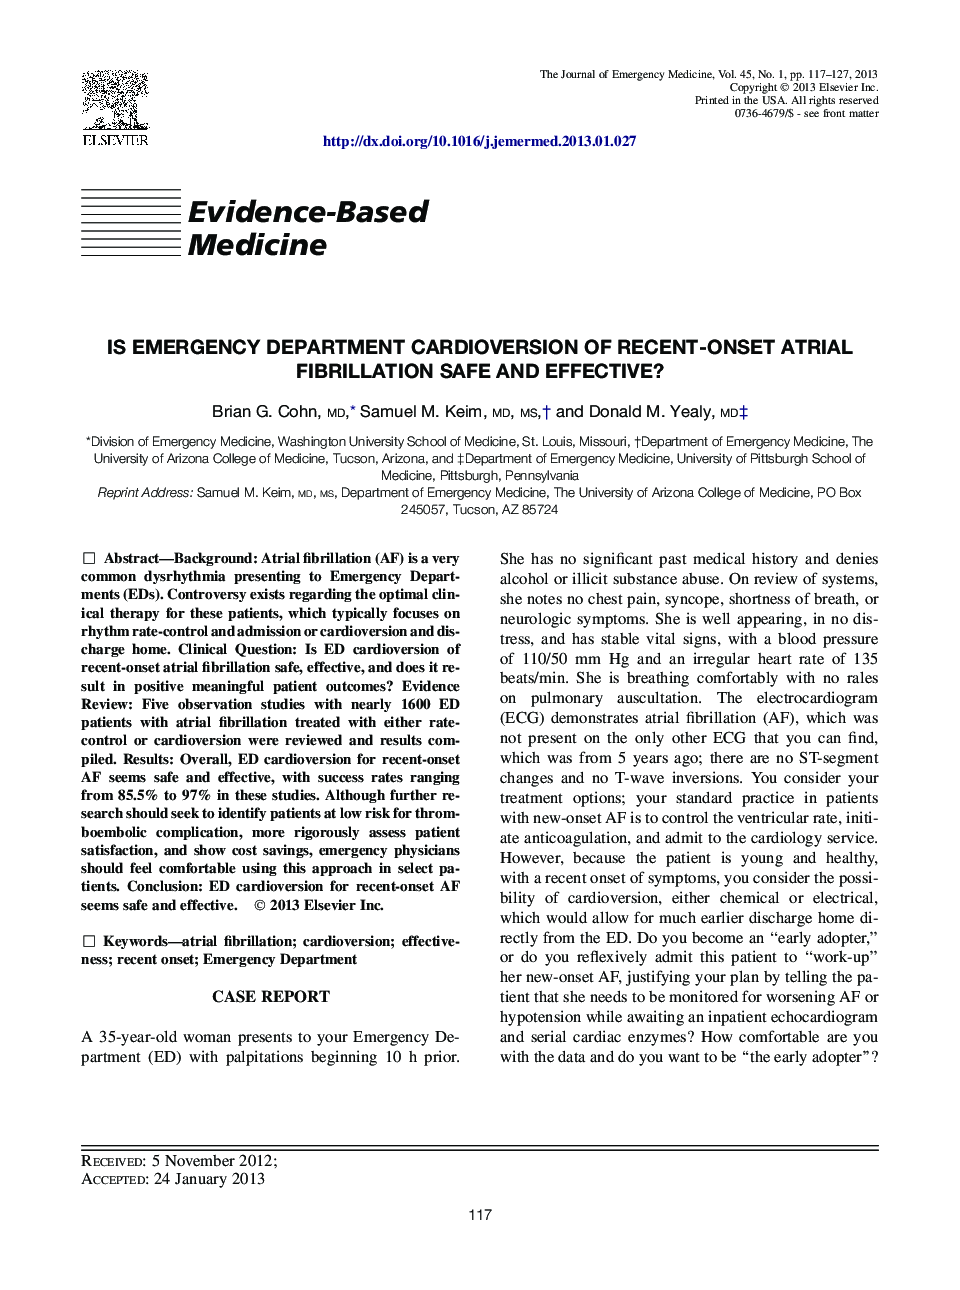 Is Emergency Department Cardioversion of Recent-onset Atrial Fibrillation Safe and Effective?